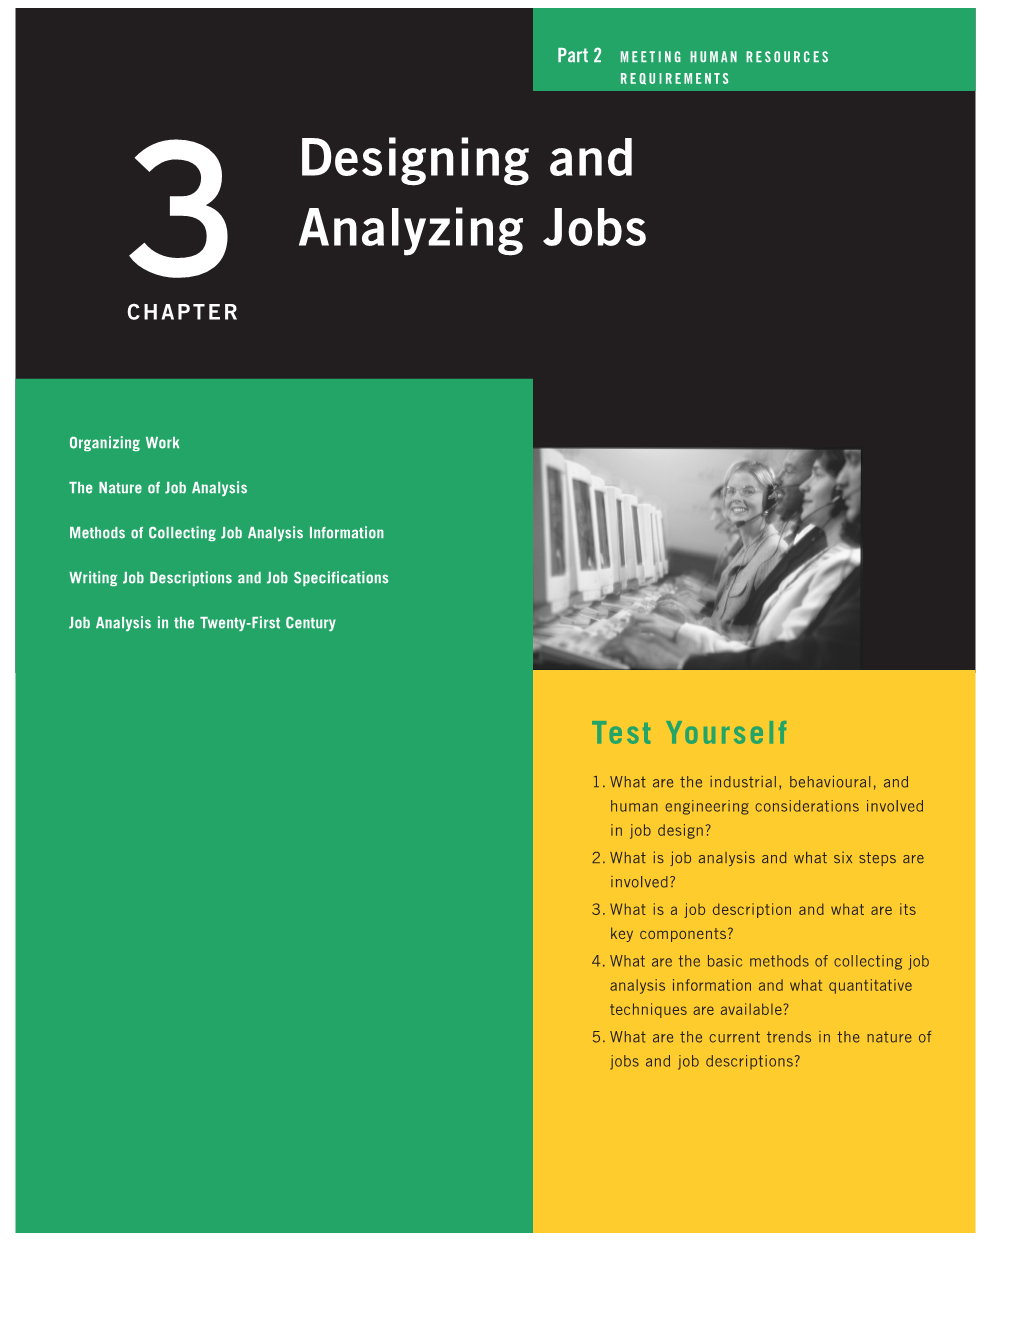 Designing and Analyzing Jobs 63